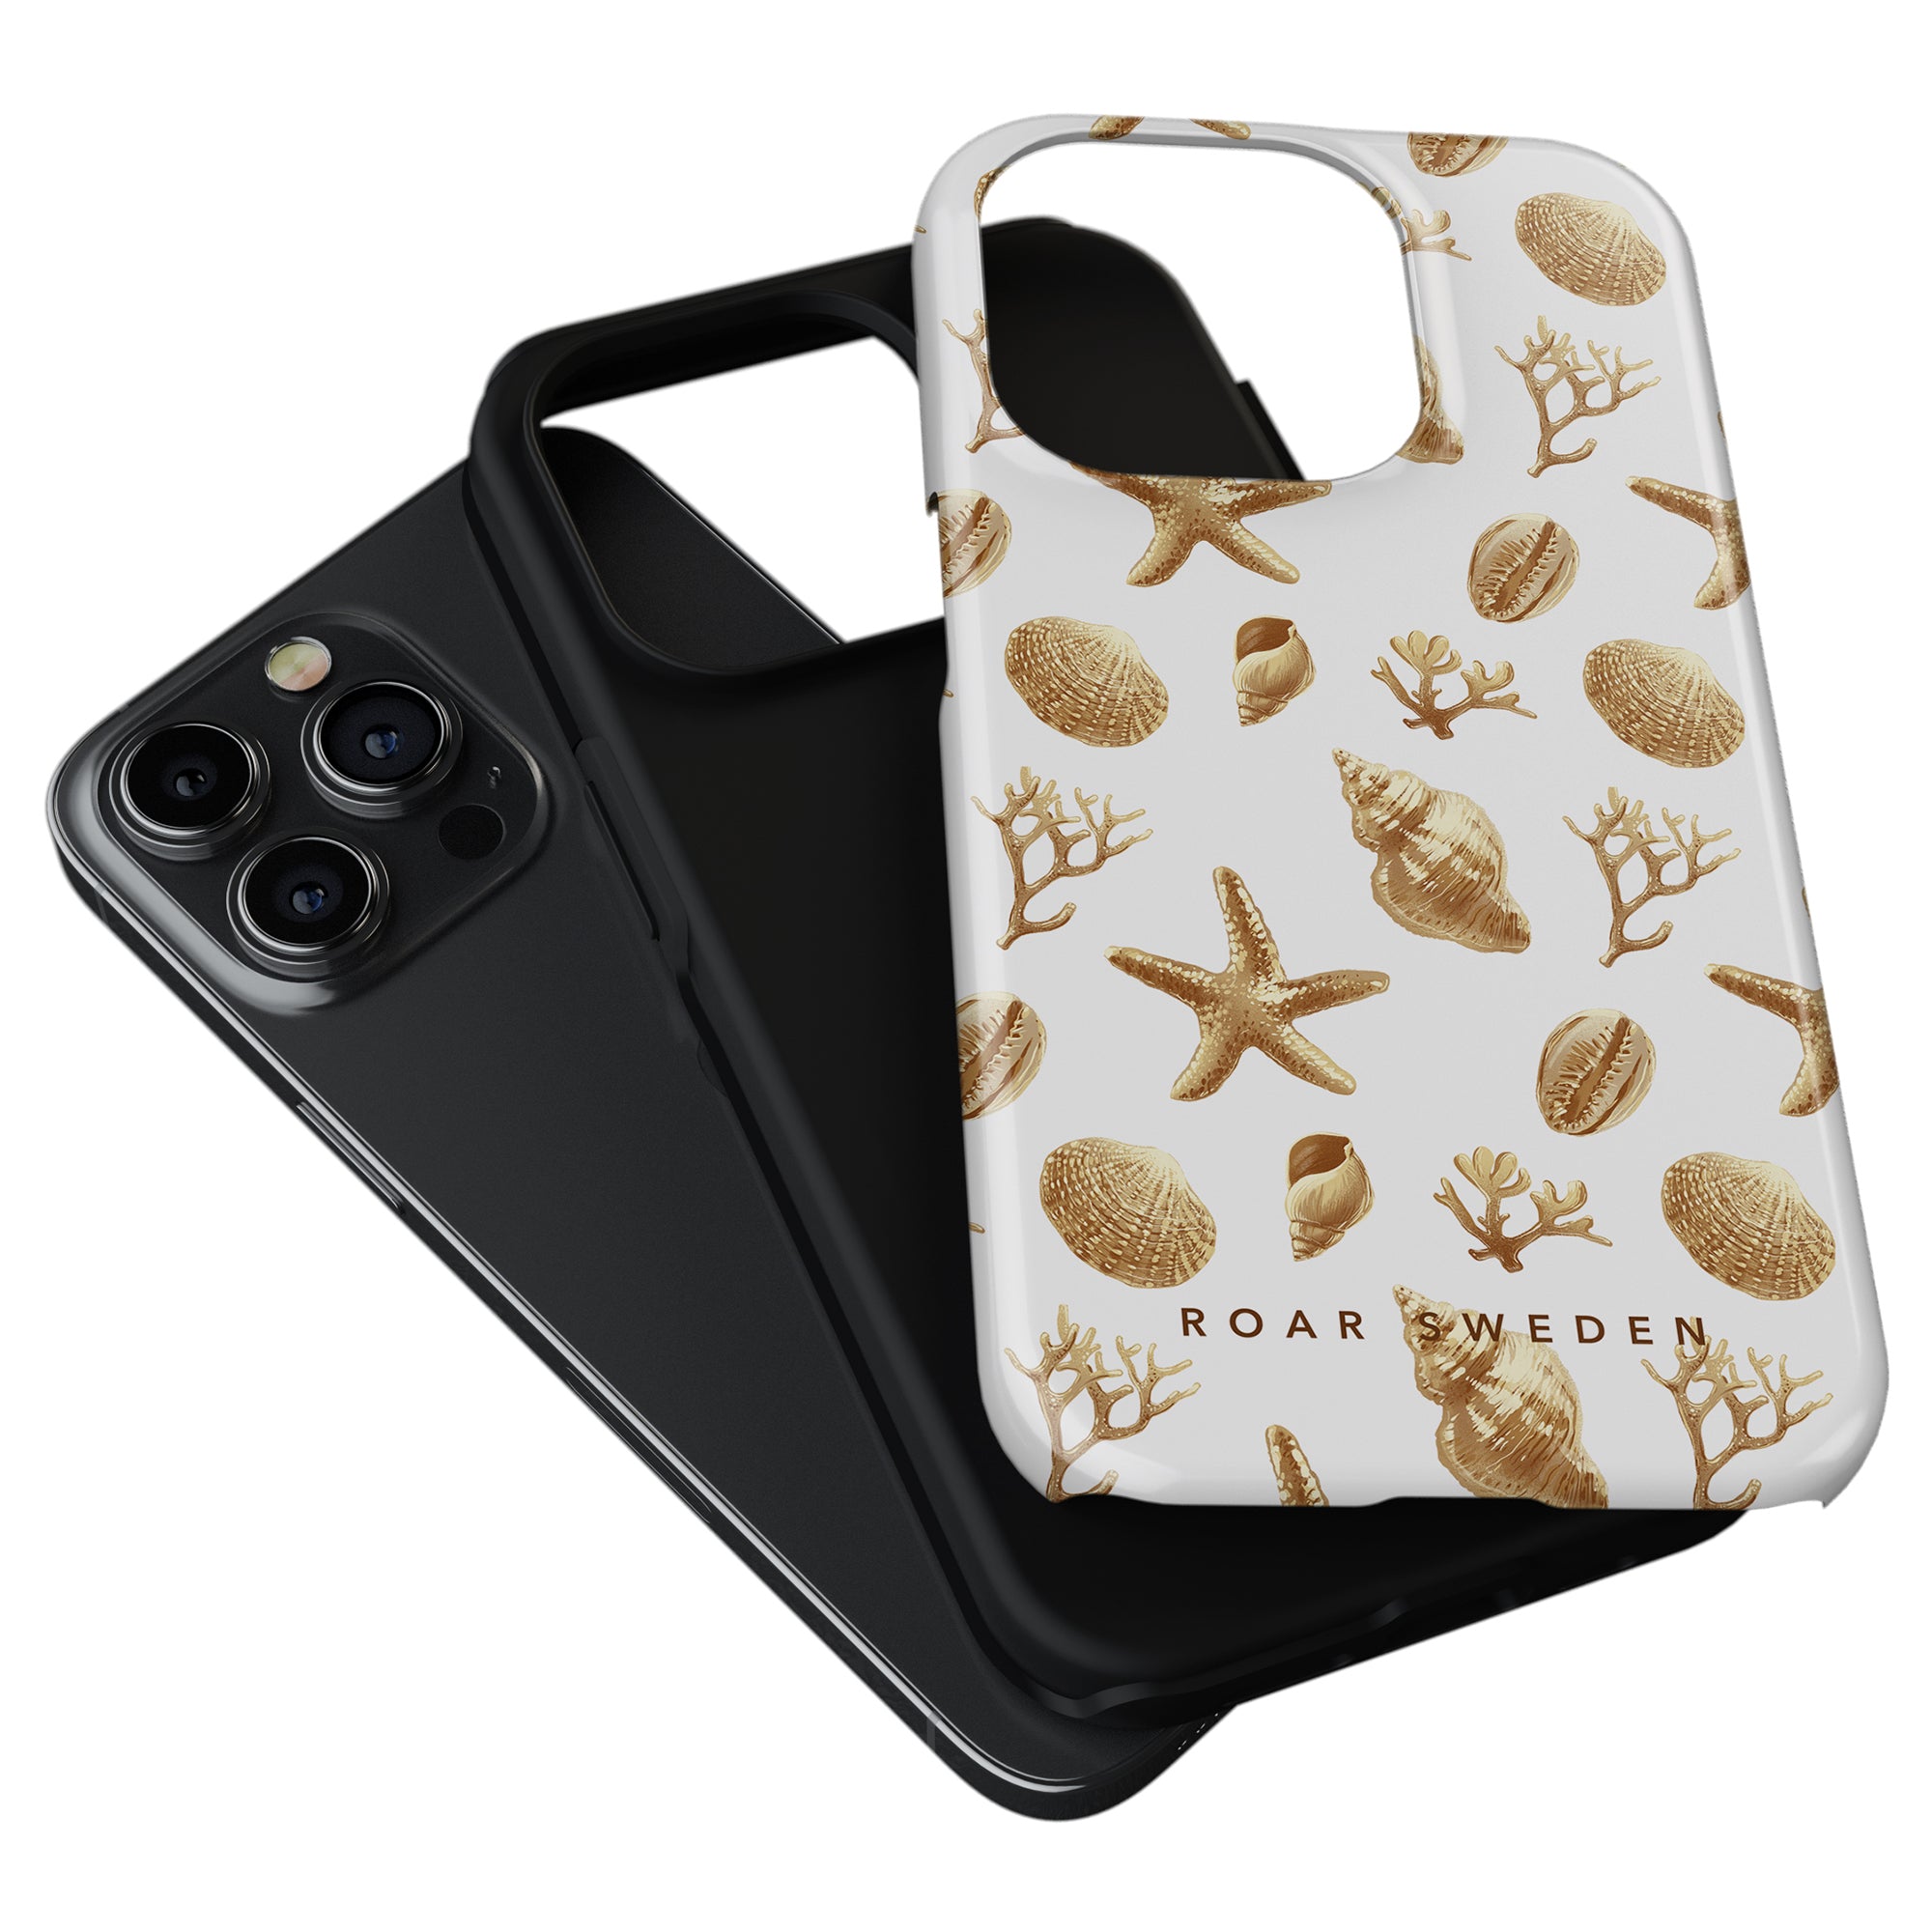 A black smartphone with a triple-lens camera paired with a Golden Shells - Tough Case from the ocean collection featuring a golden seashell and starfish design.